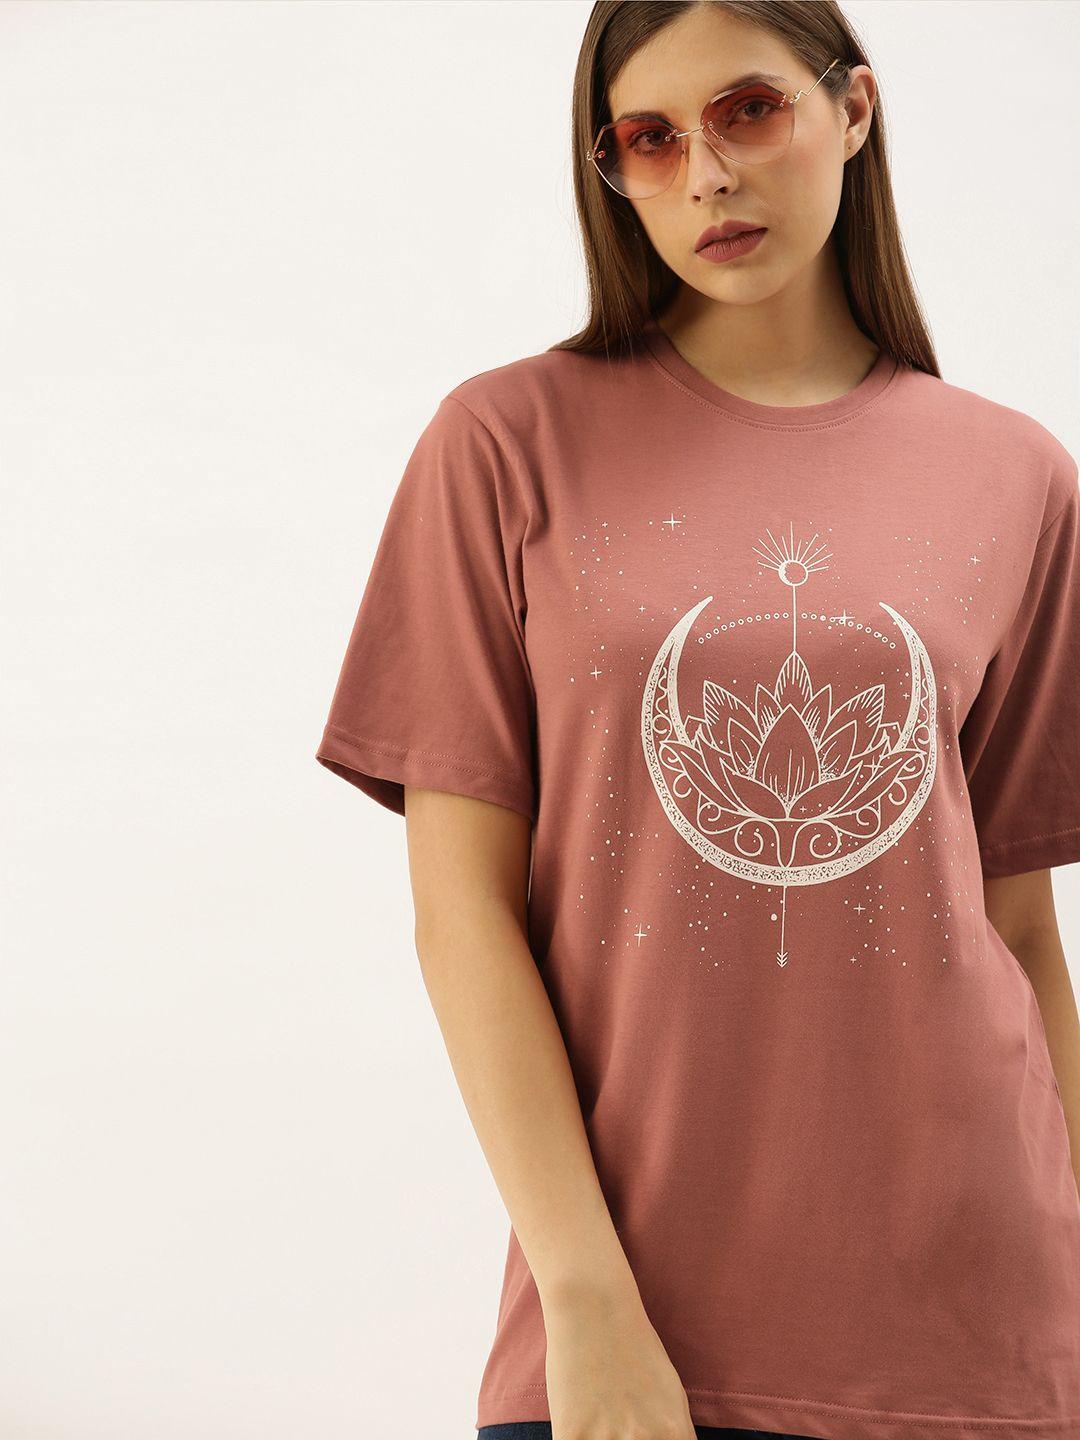 dillinger-women-pink-printed-round-neck-oversized-pure-cotton-t-shirt